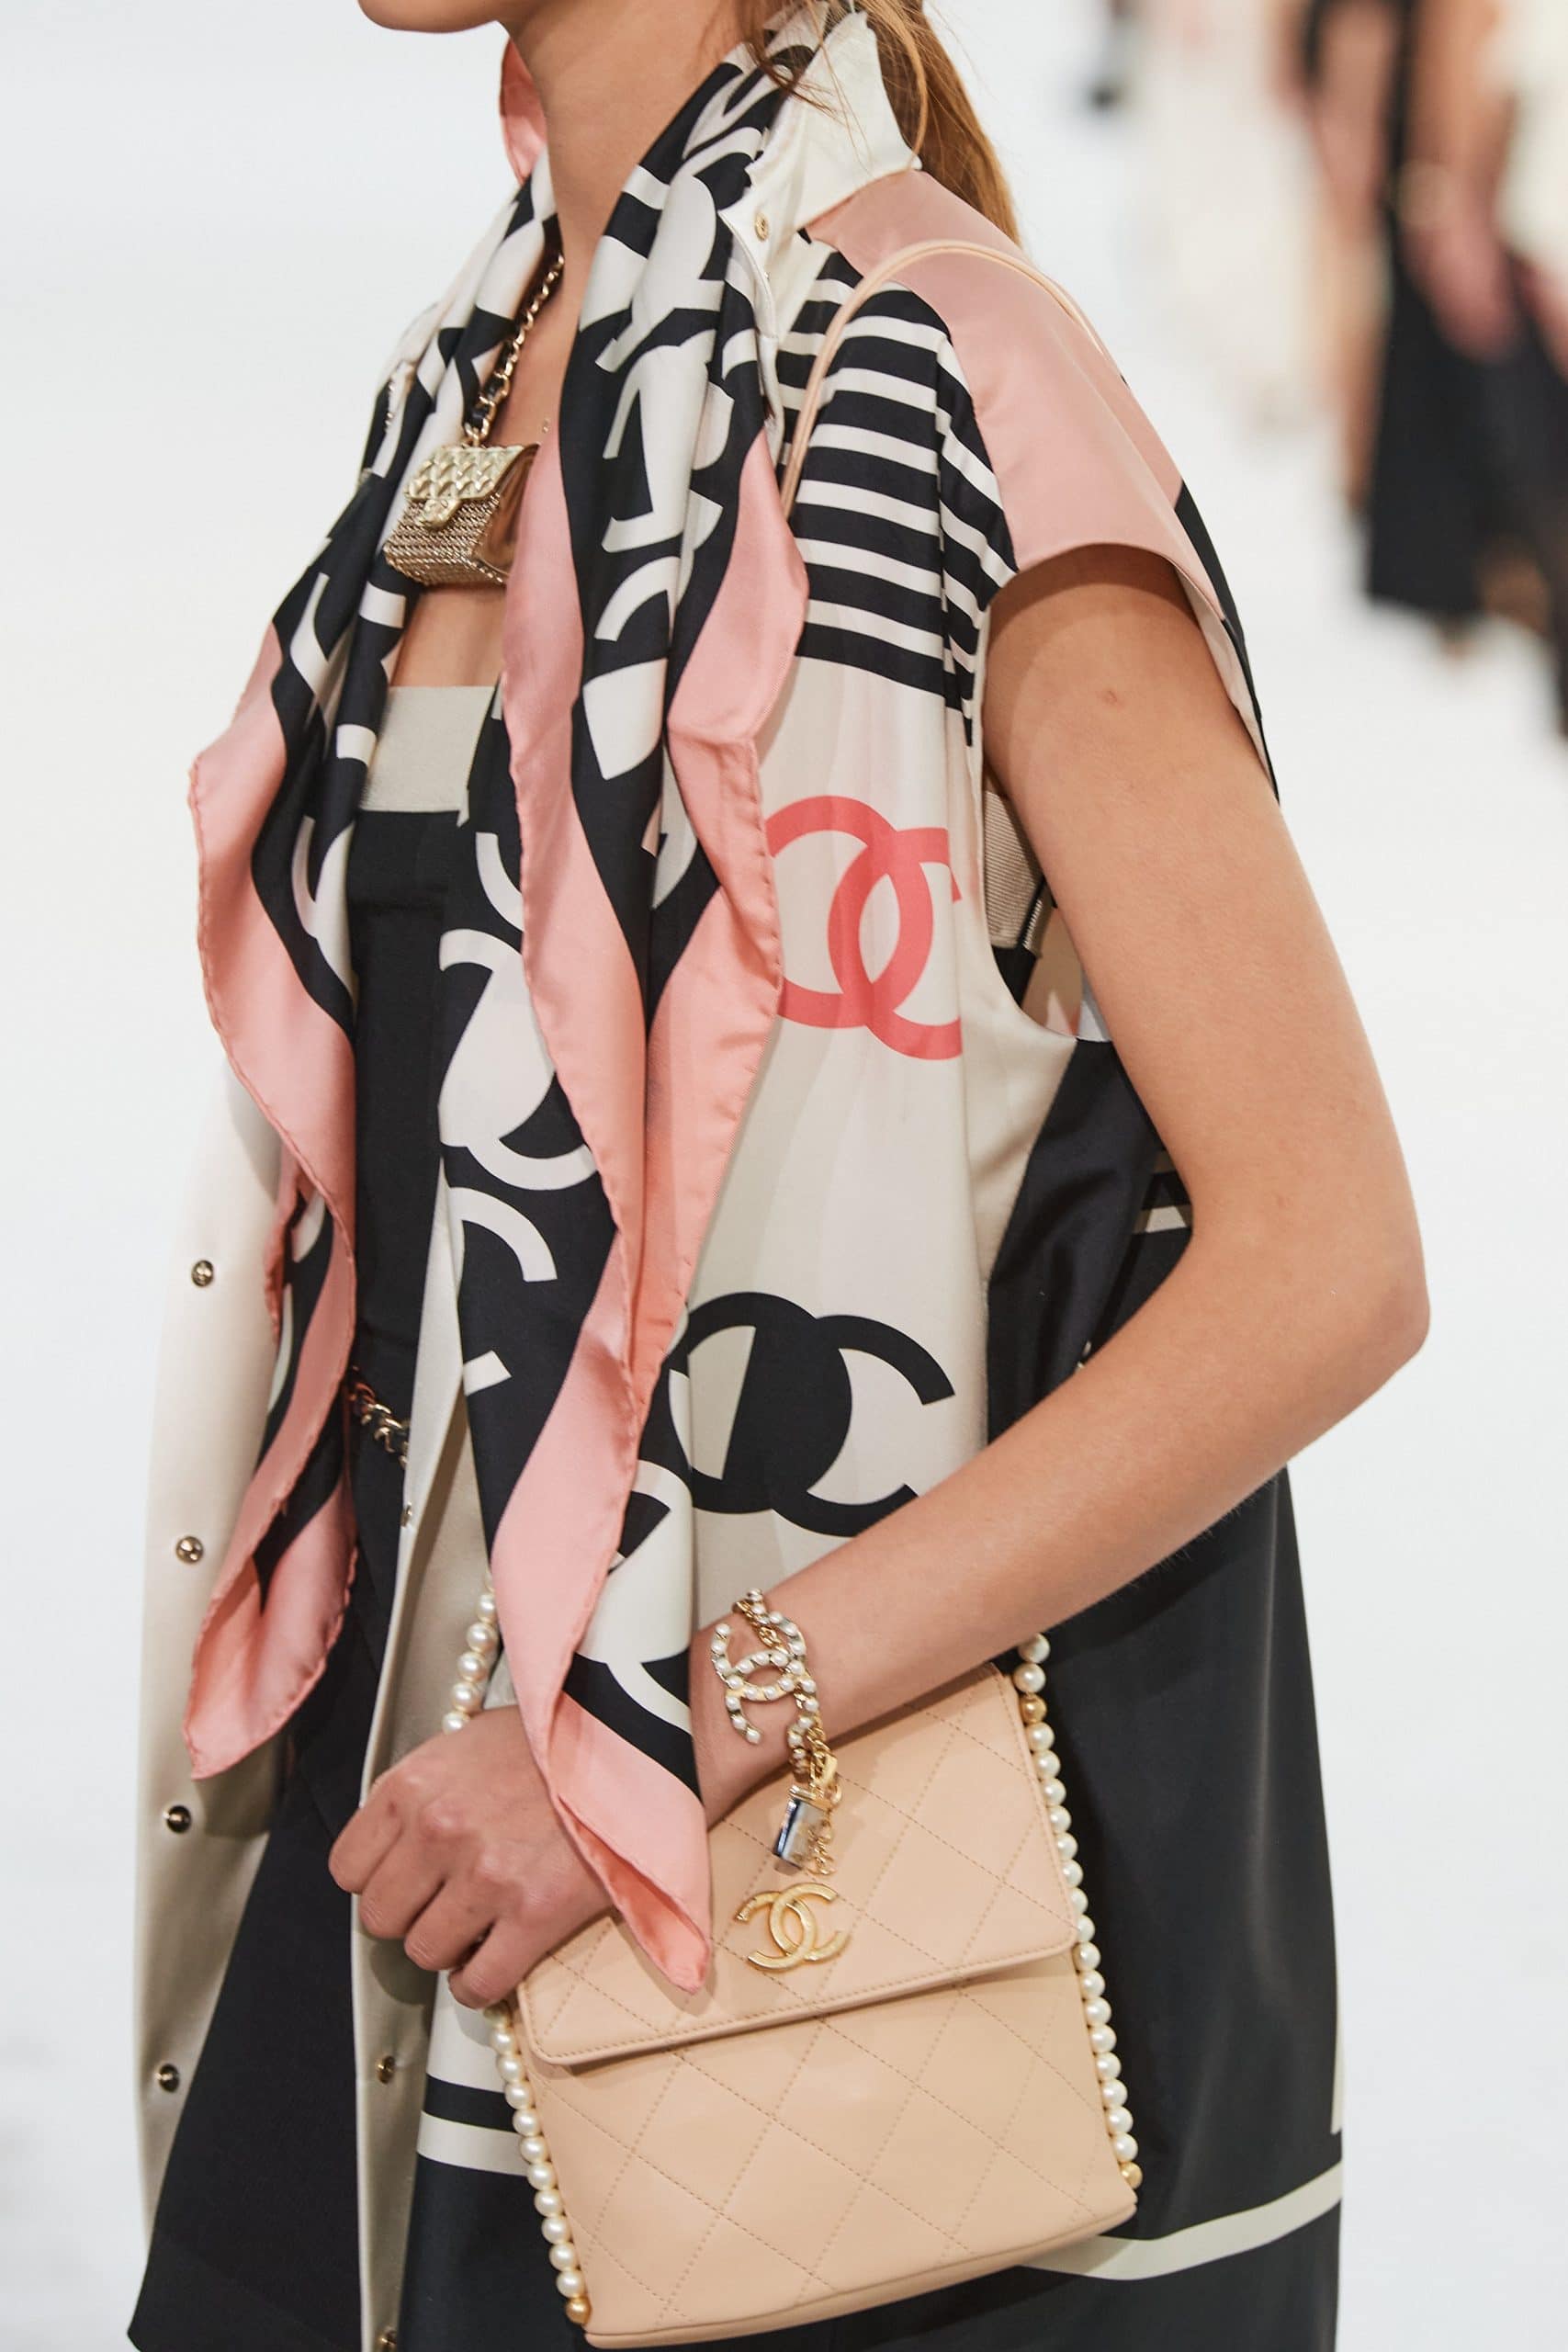 Chanel Spring/Summer 2021 Runway Bag Collection Featuring Super Tiny Bags -  Spotted Fashion